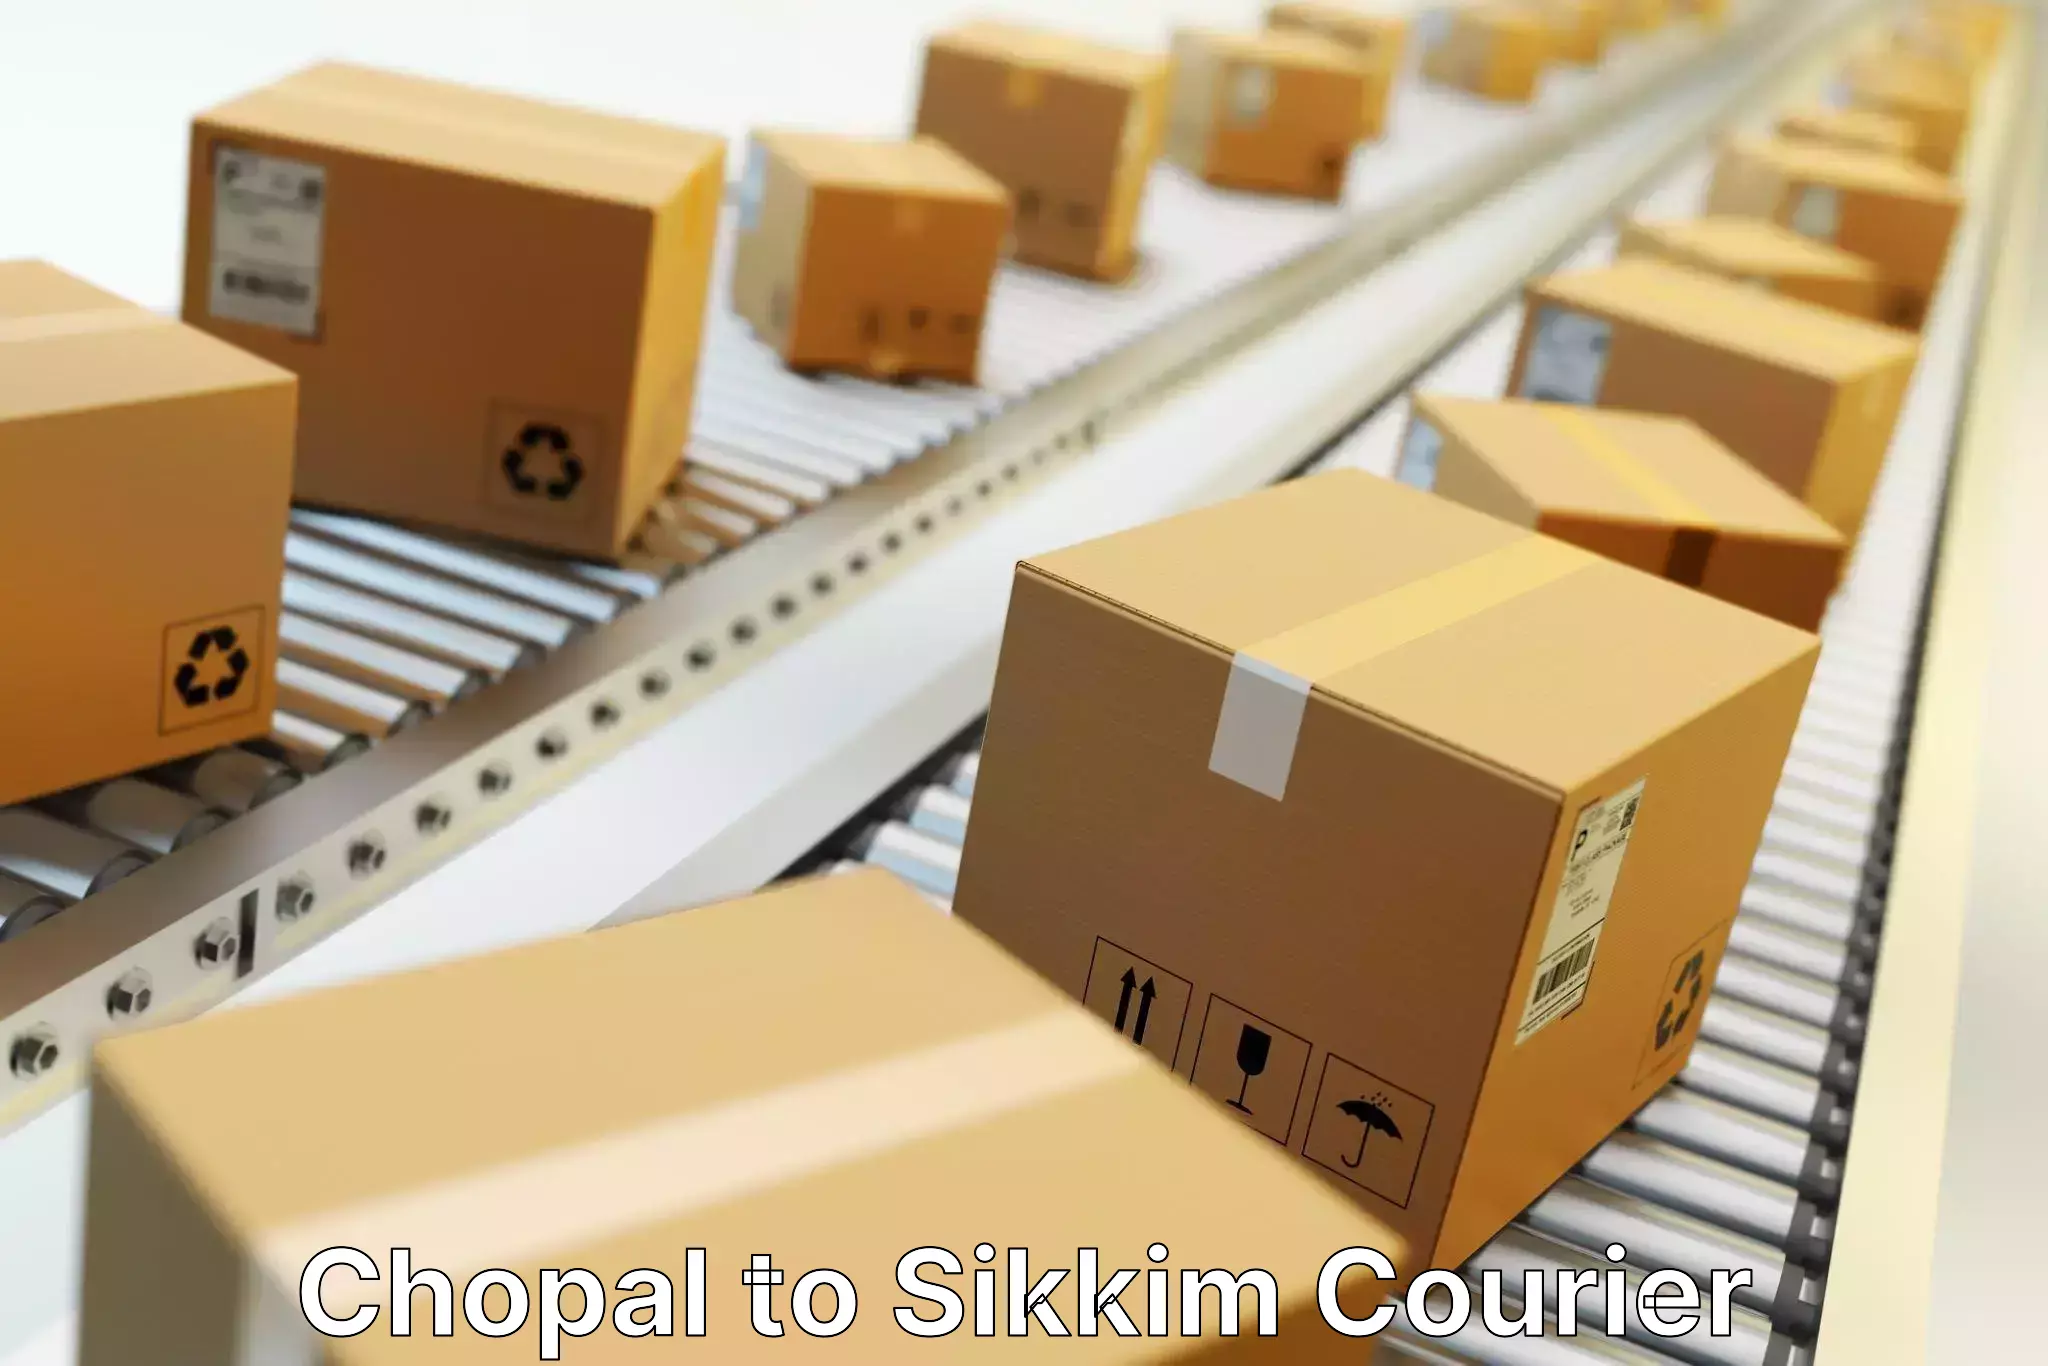 Seamless shipping service Chopal to Sikkim